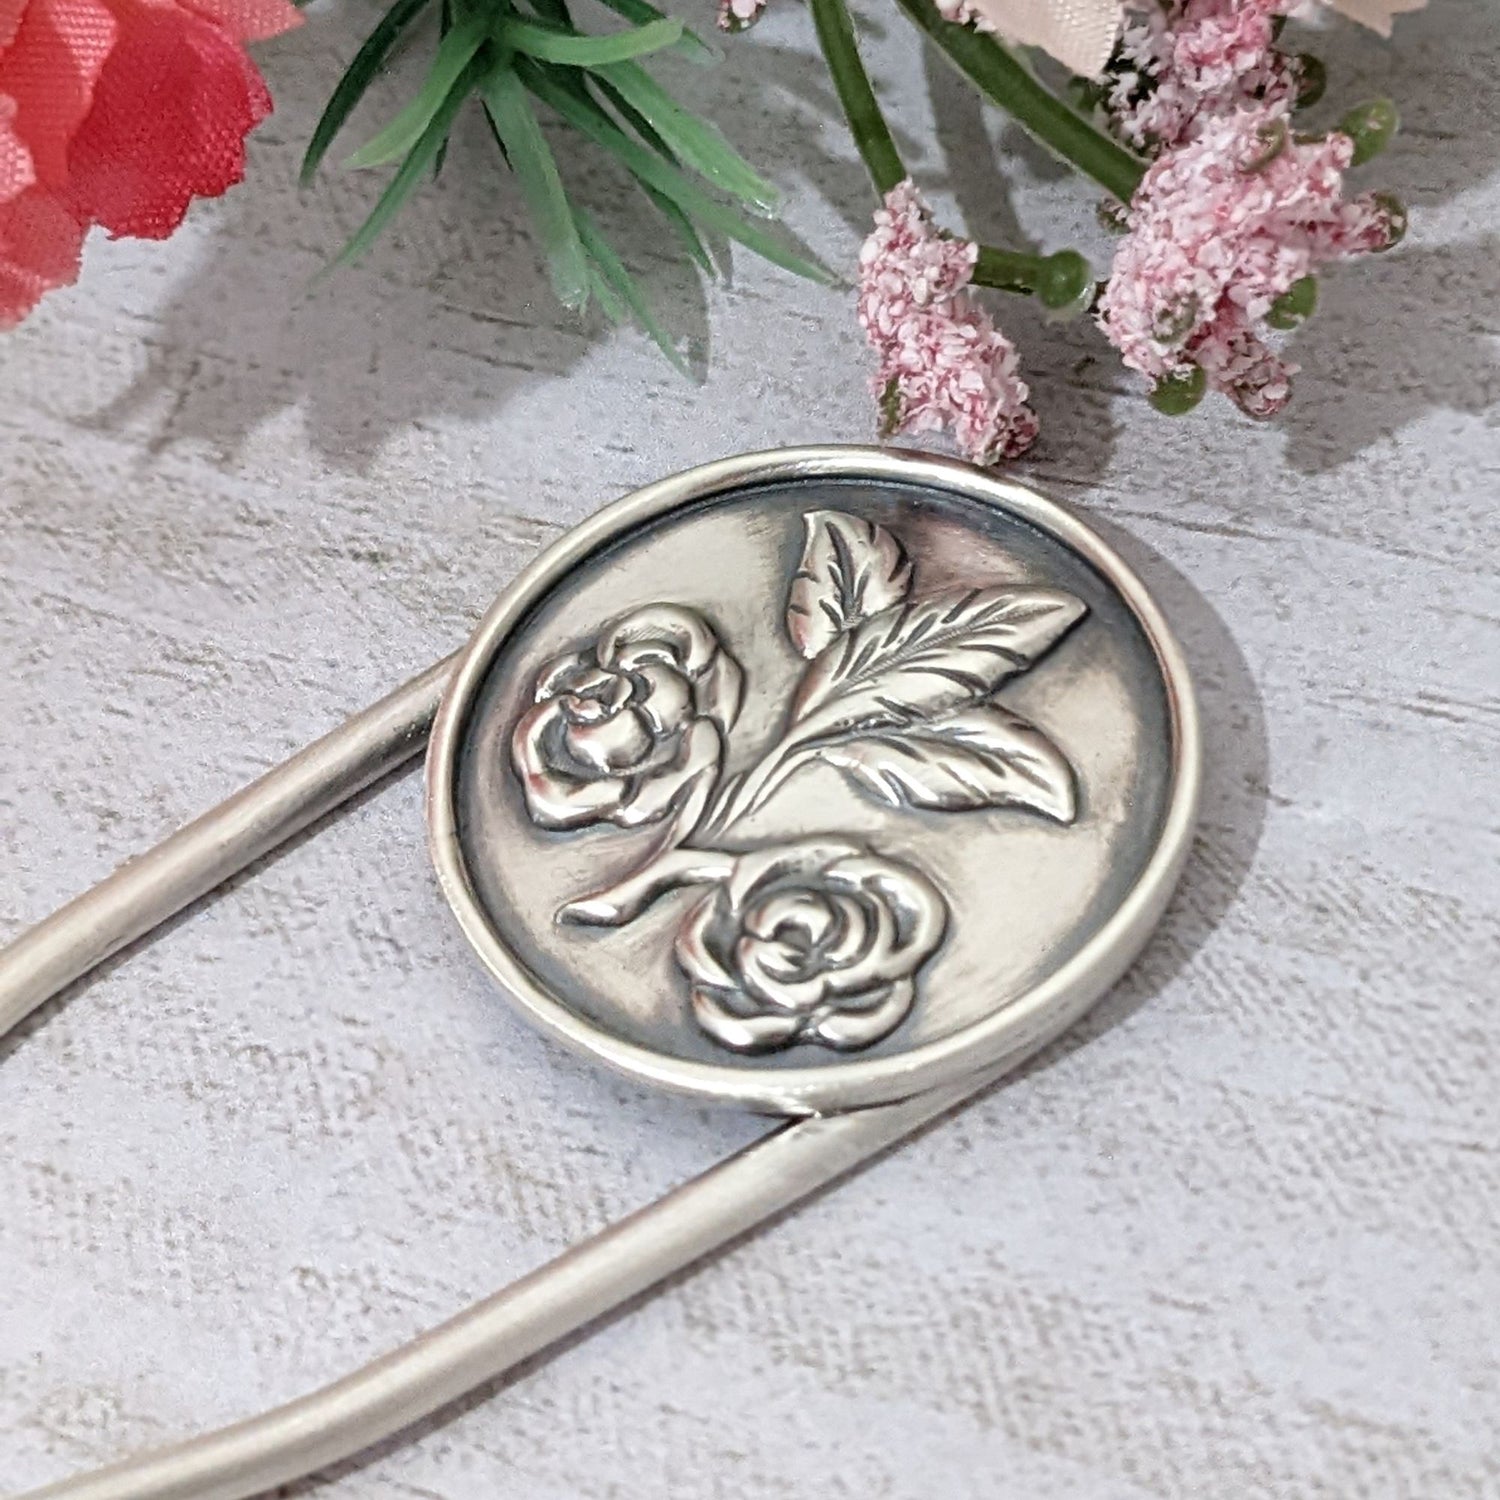 Sterling silver hair fork. Attached to top of fork is a round piece of silver with a rounded border edge. The sheet has a raised design of two roses growing off of a branch clipping and at the end of the branch there are three leaves. Staged photo on a gray background with flowers.